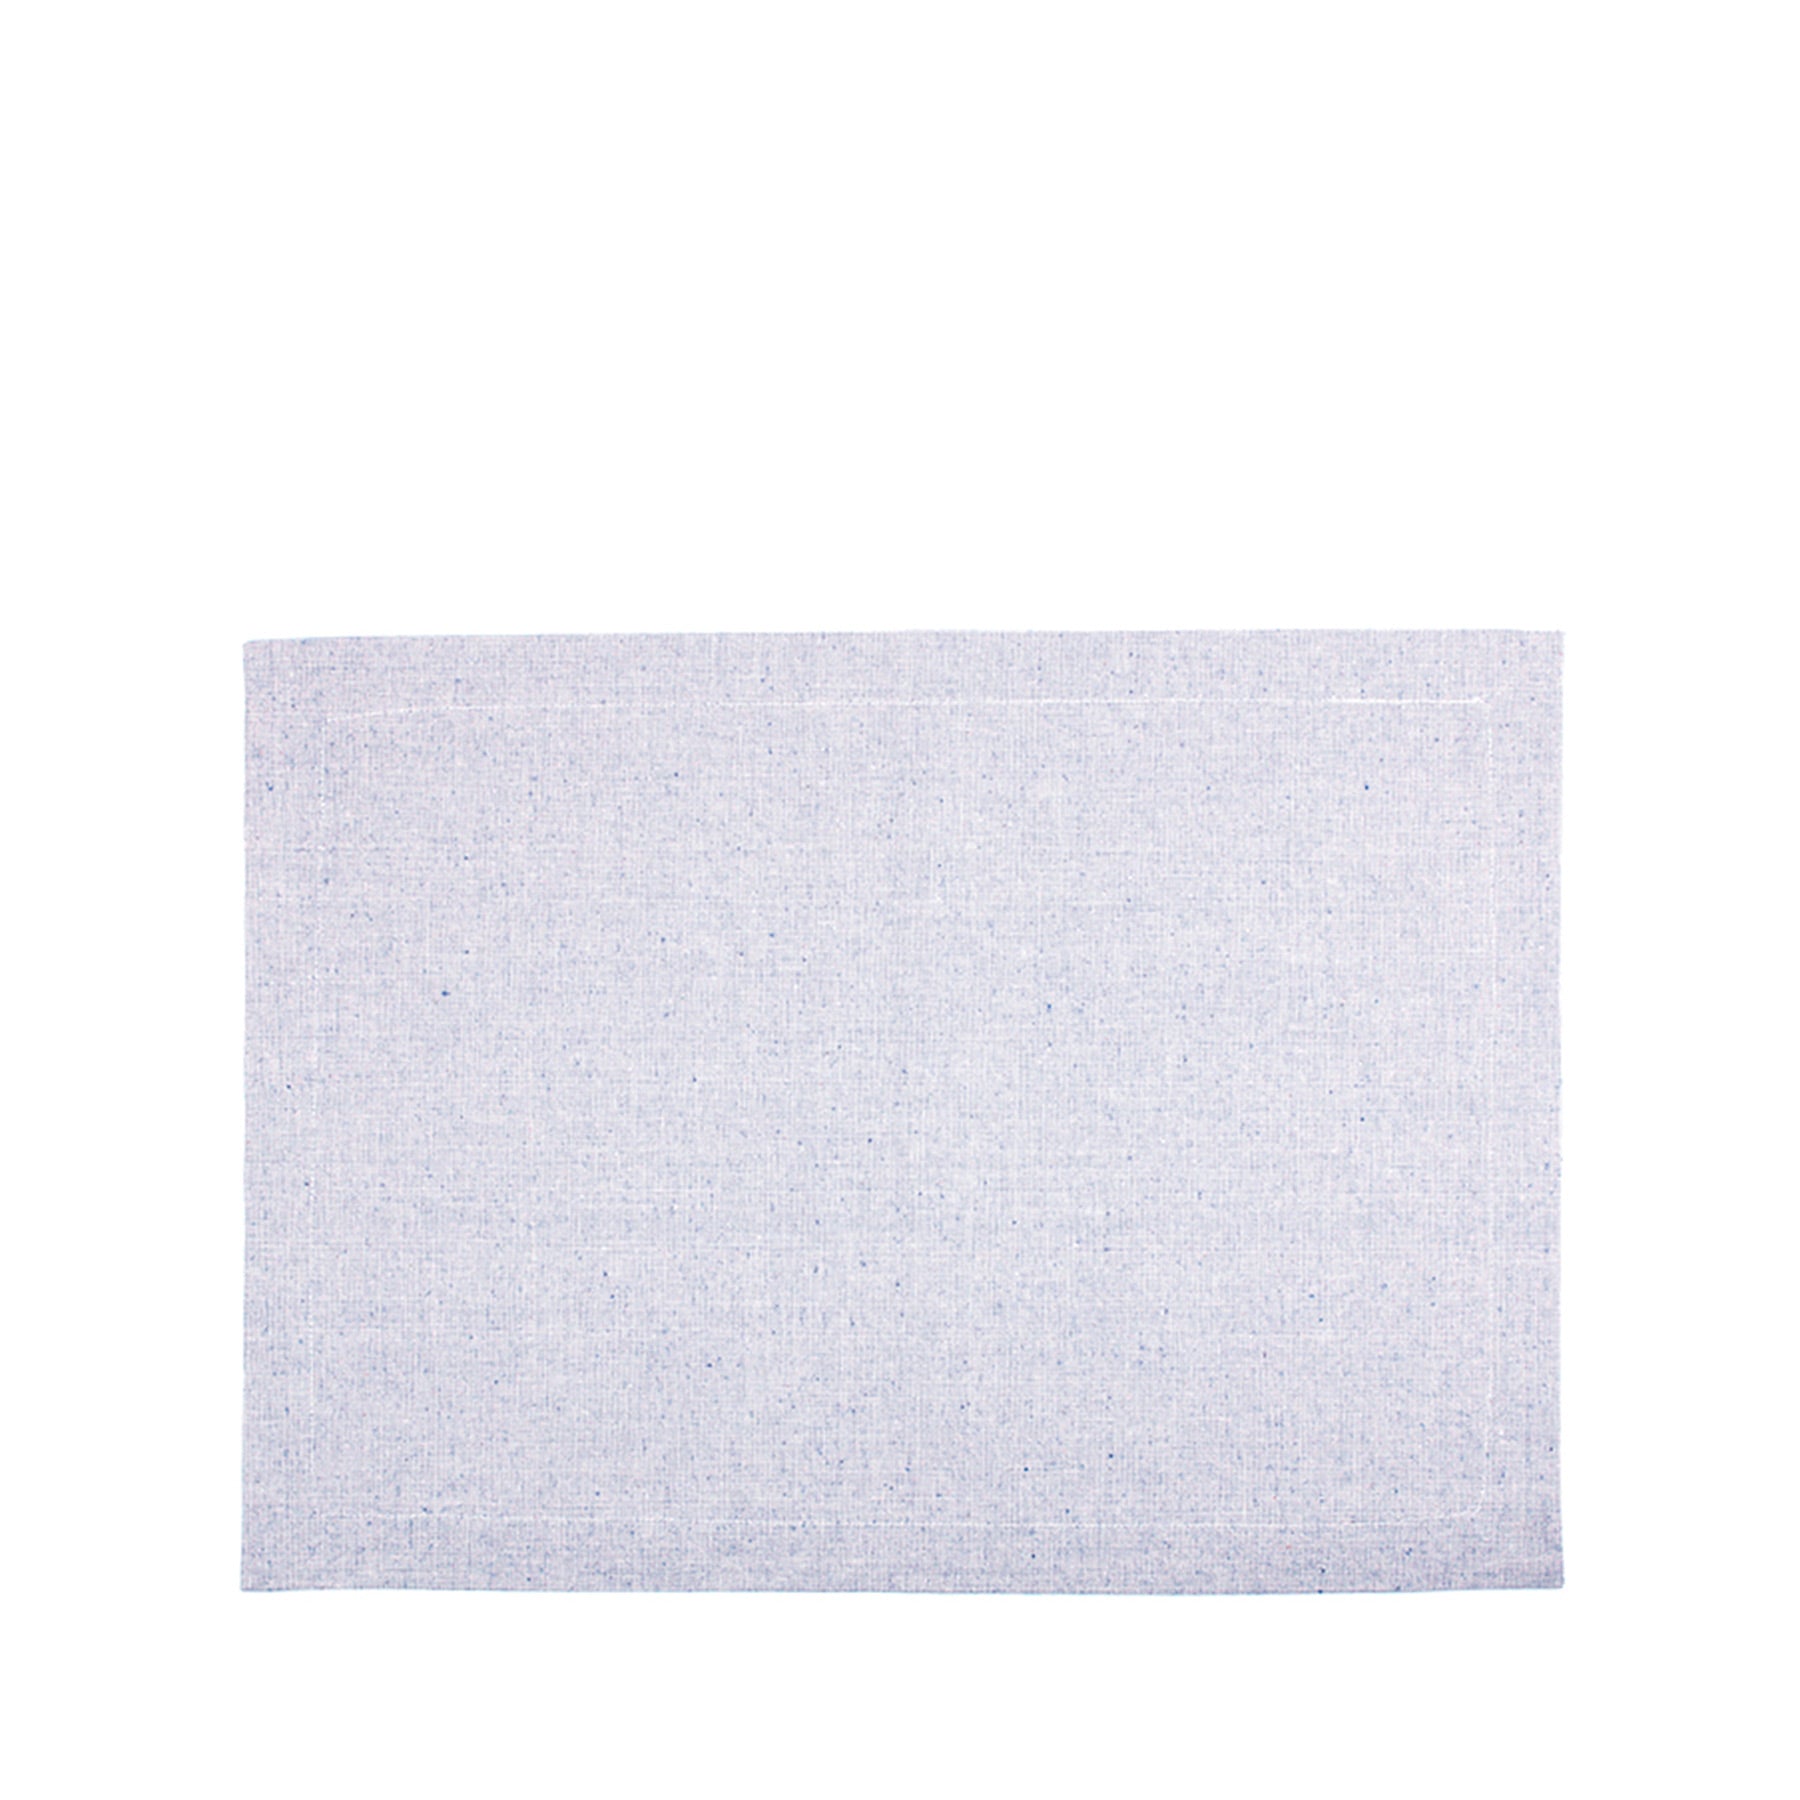 Organic Cotton Placemat in Blue Zoom Image 1